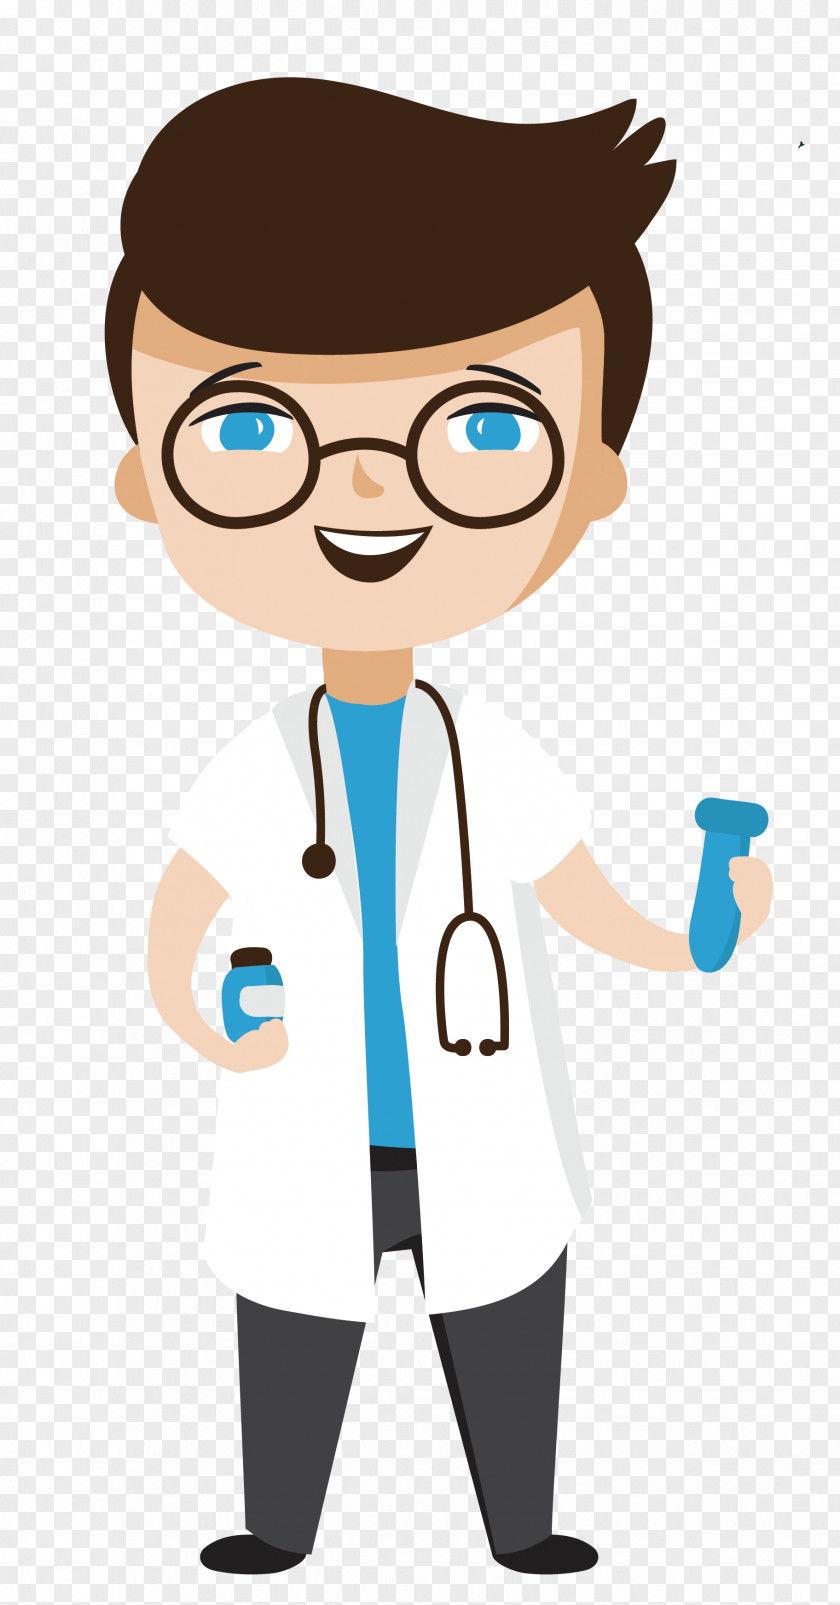 Happy Doctor Cartoon Physician Illustration PNG